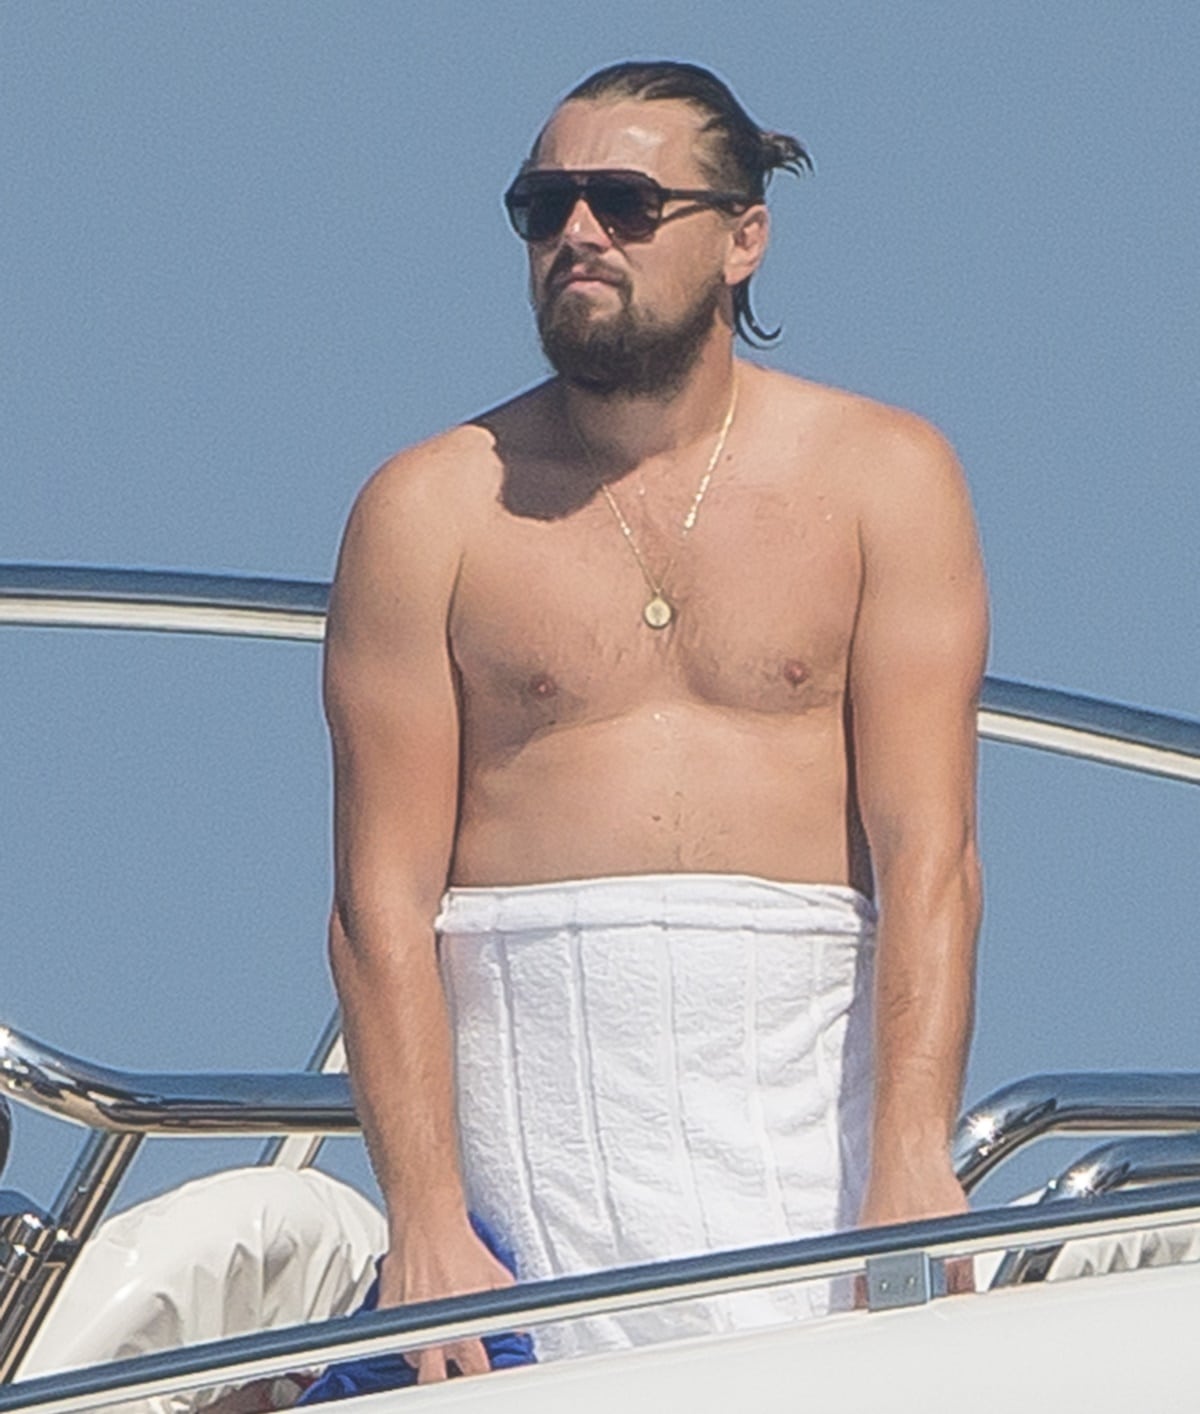 Leonardo DiCaprio has been ridiculed for only dating women under 25